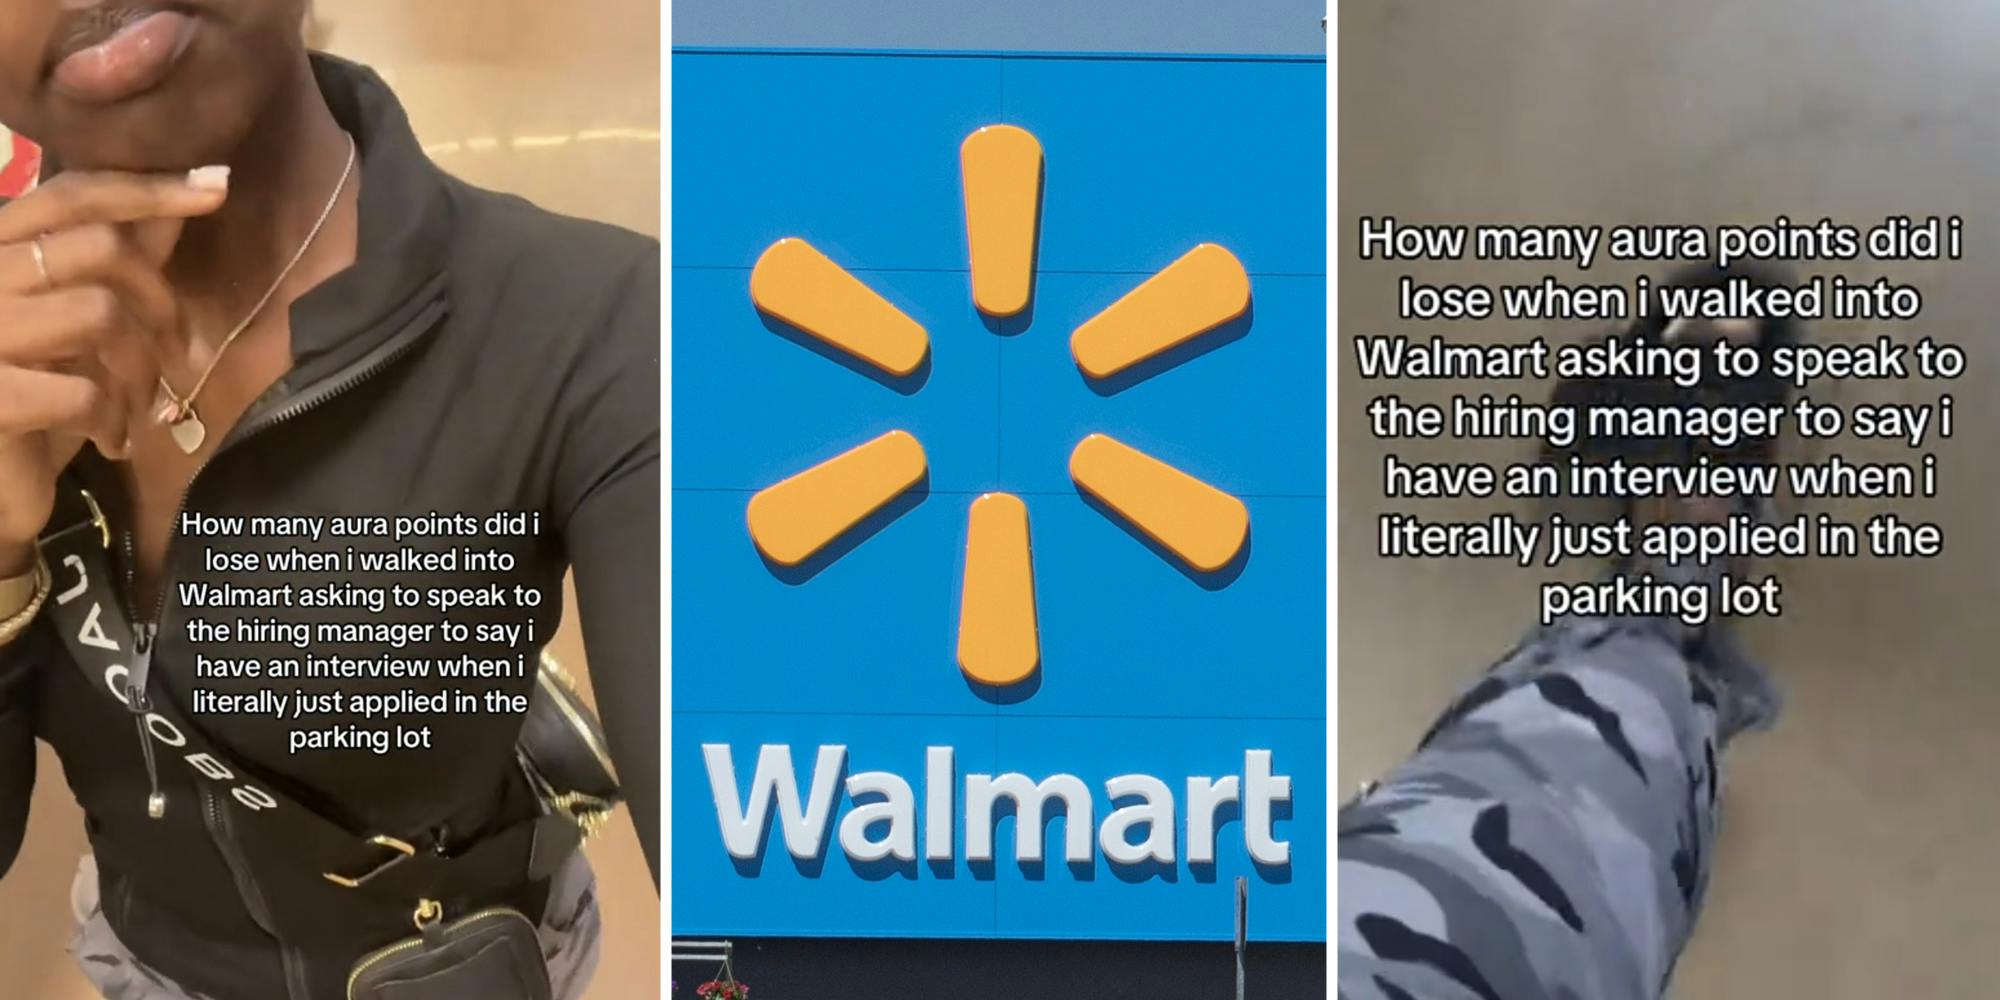 ‘I did this & got hired the same day’: Job seeker shares trick she used to get an interview at Walmart on the spot